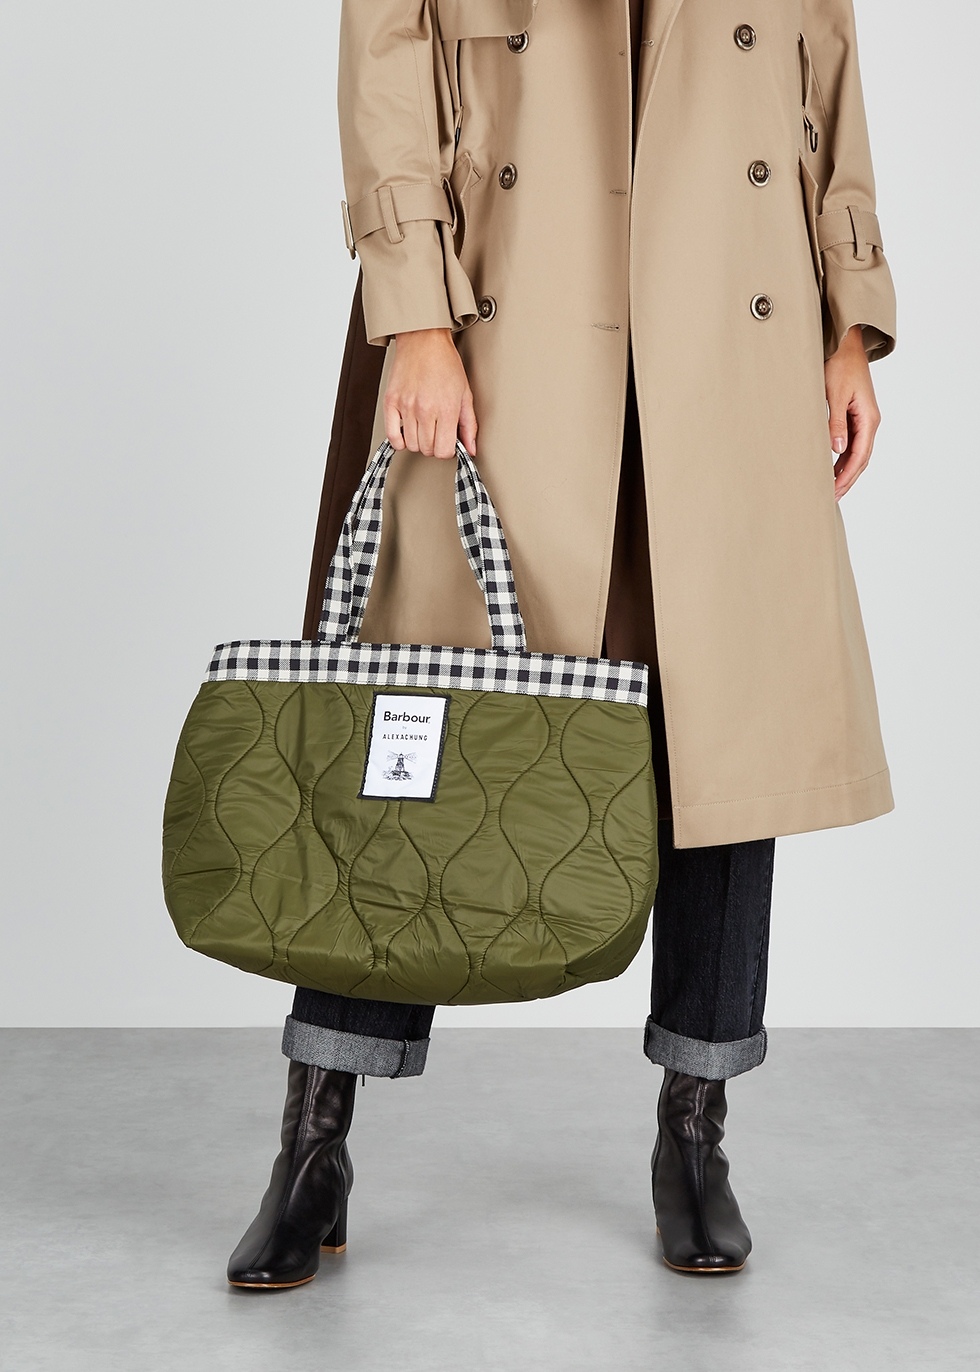 barbour quilted bag